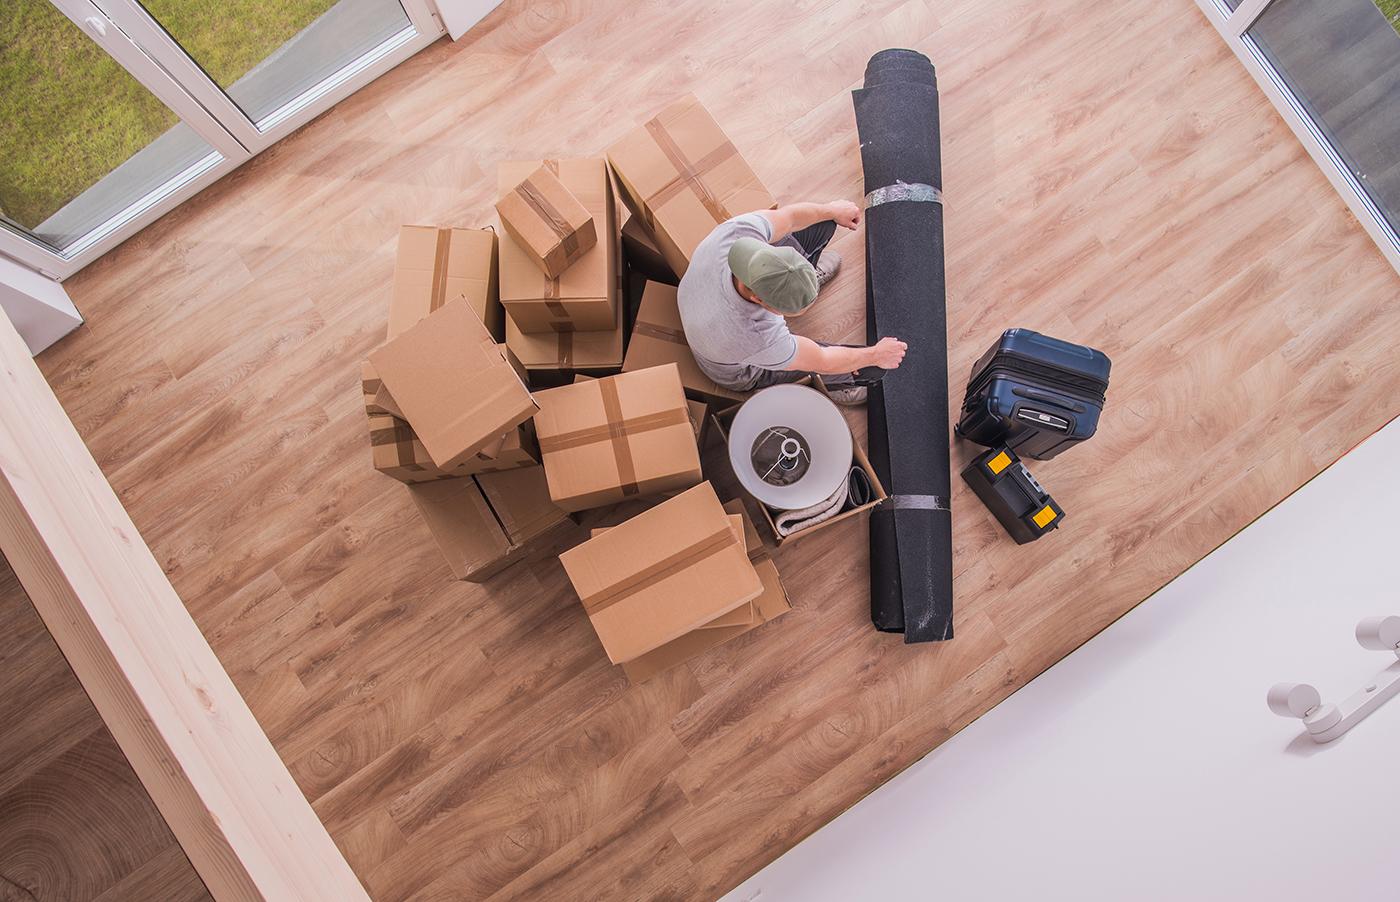 10 reasons to hire professional packers and movers male proferssional mover with boxes and random ho 2021 04 04 03 14 43 utc